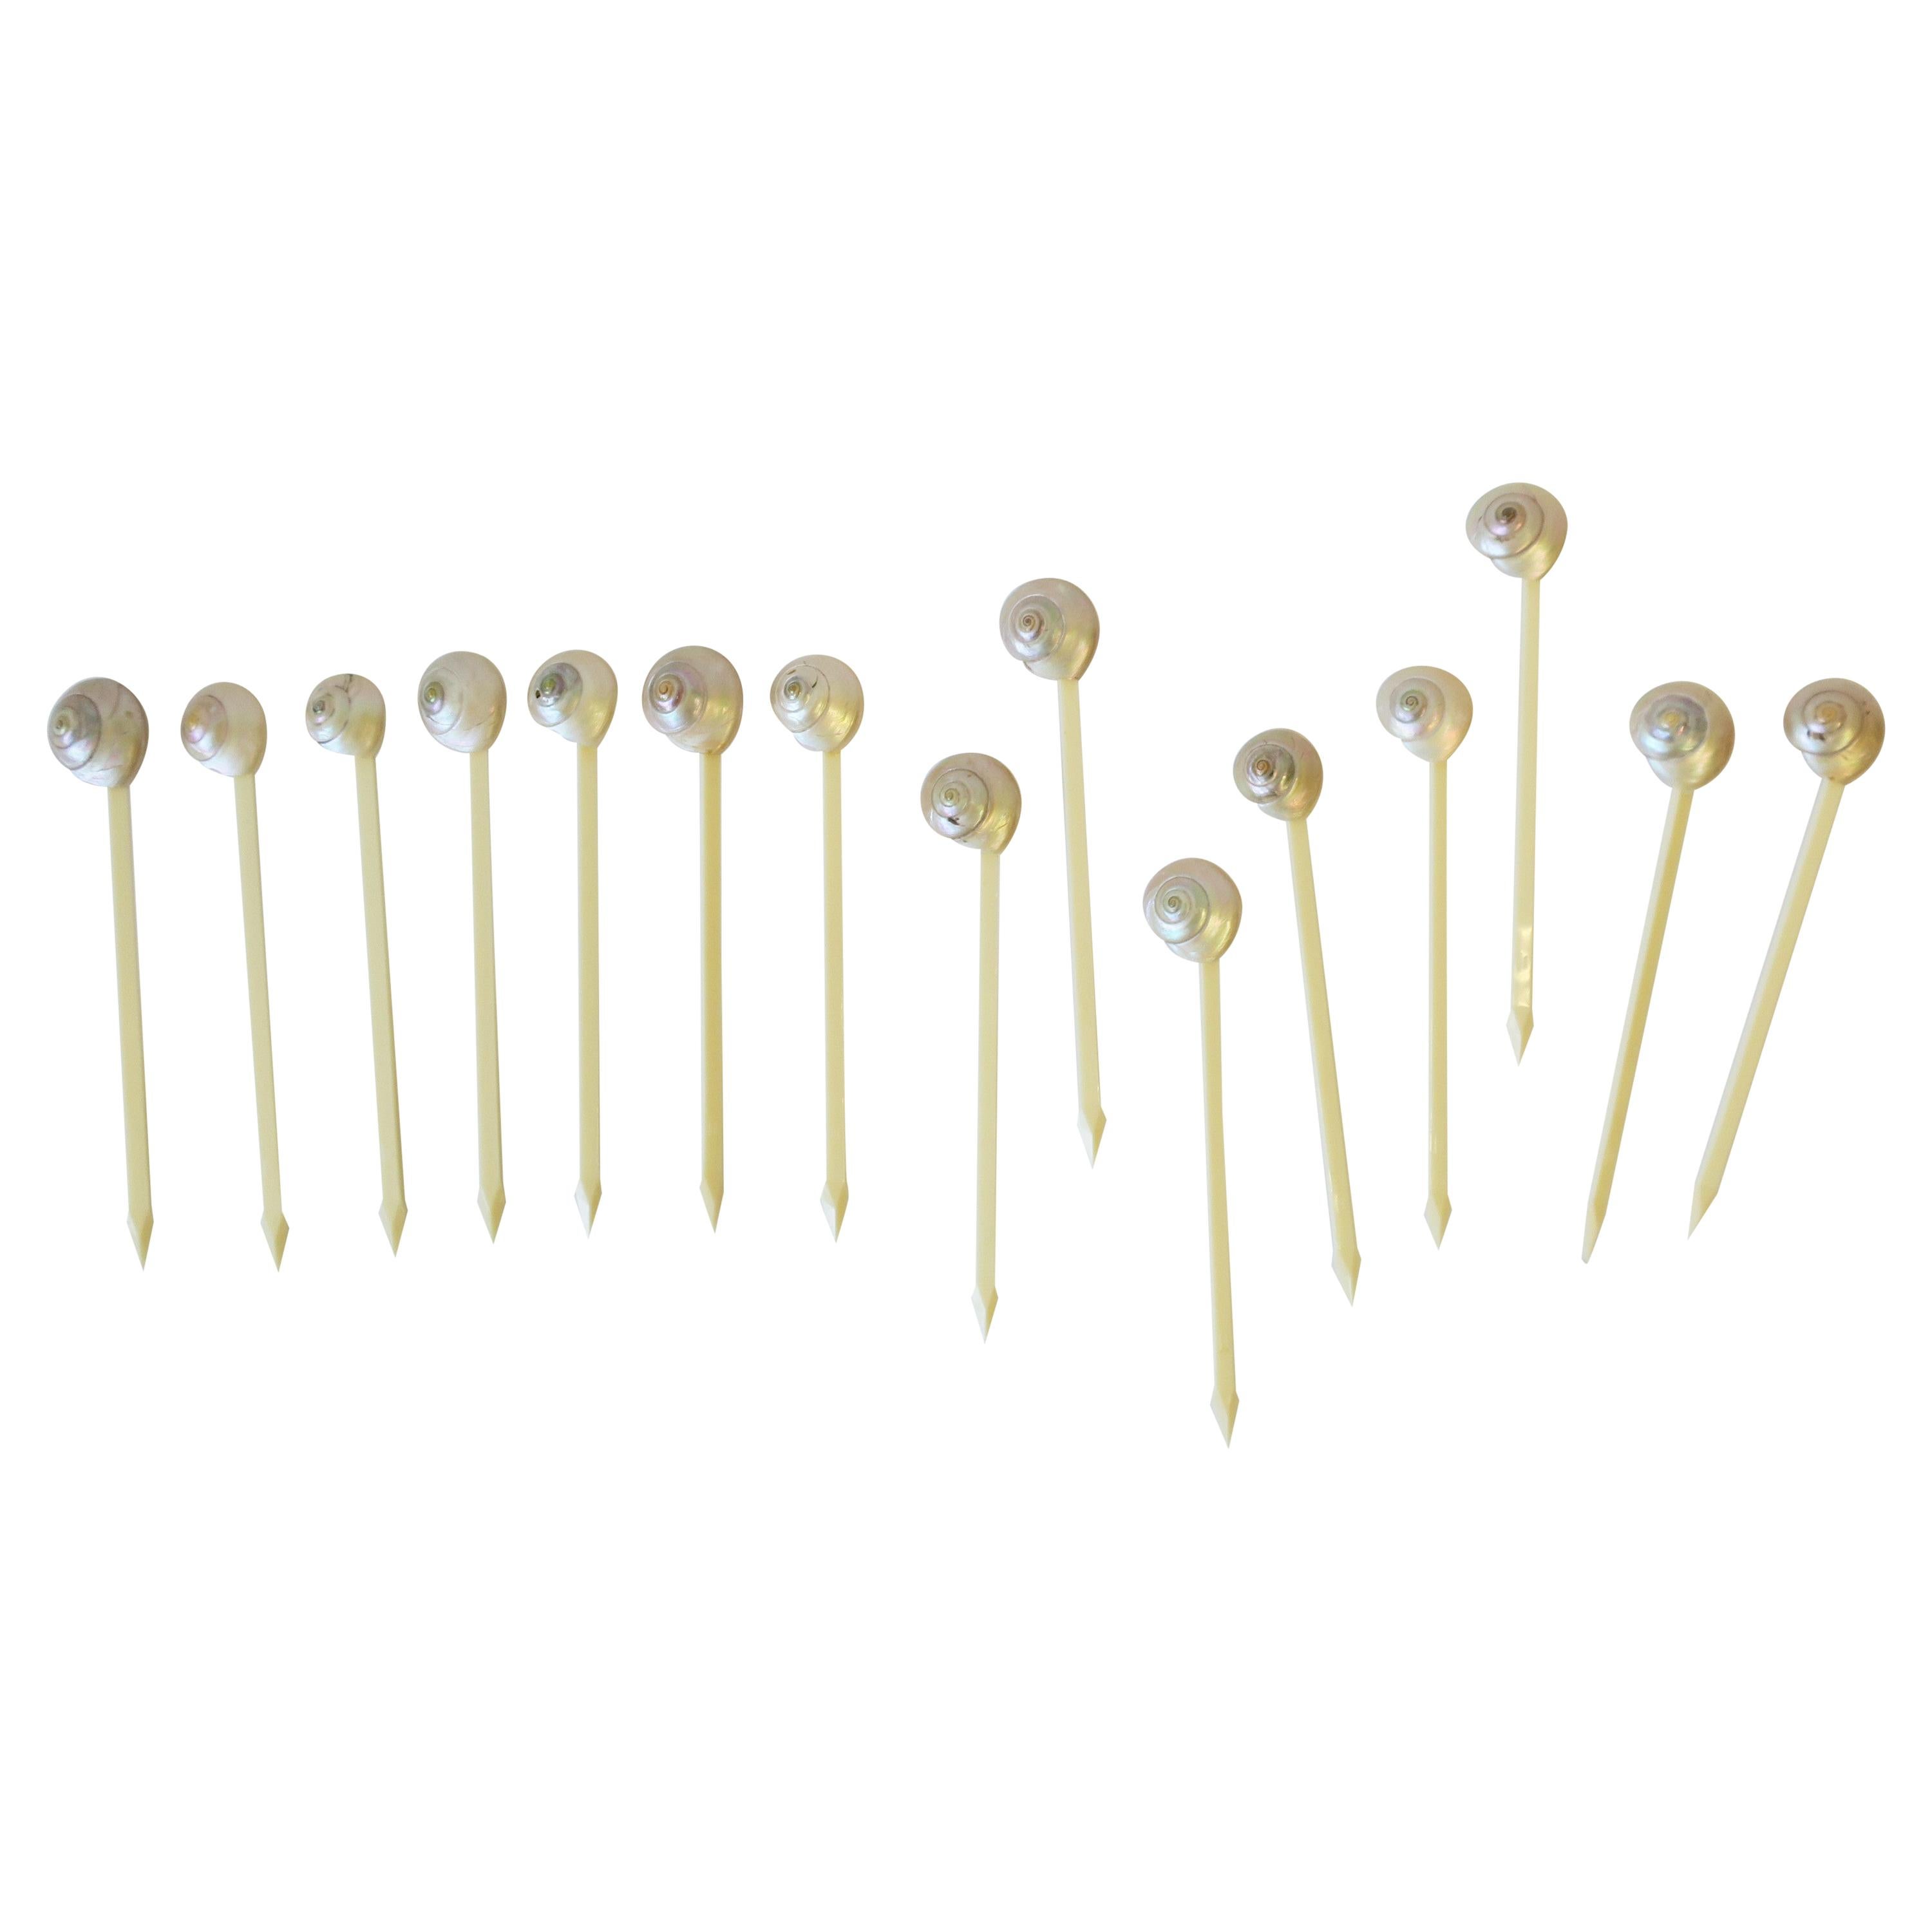 Seashell Mother of Pearl Cocktail Stirrers or Barware Picks, Set of 15